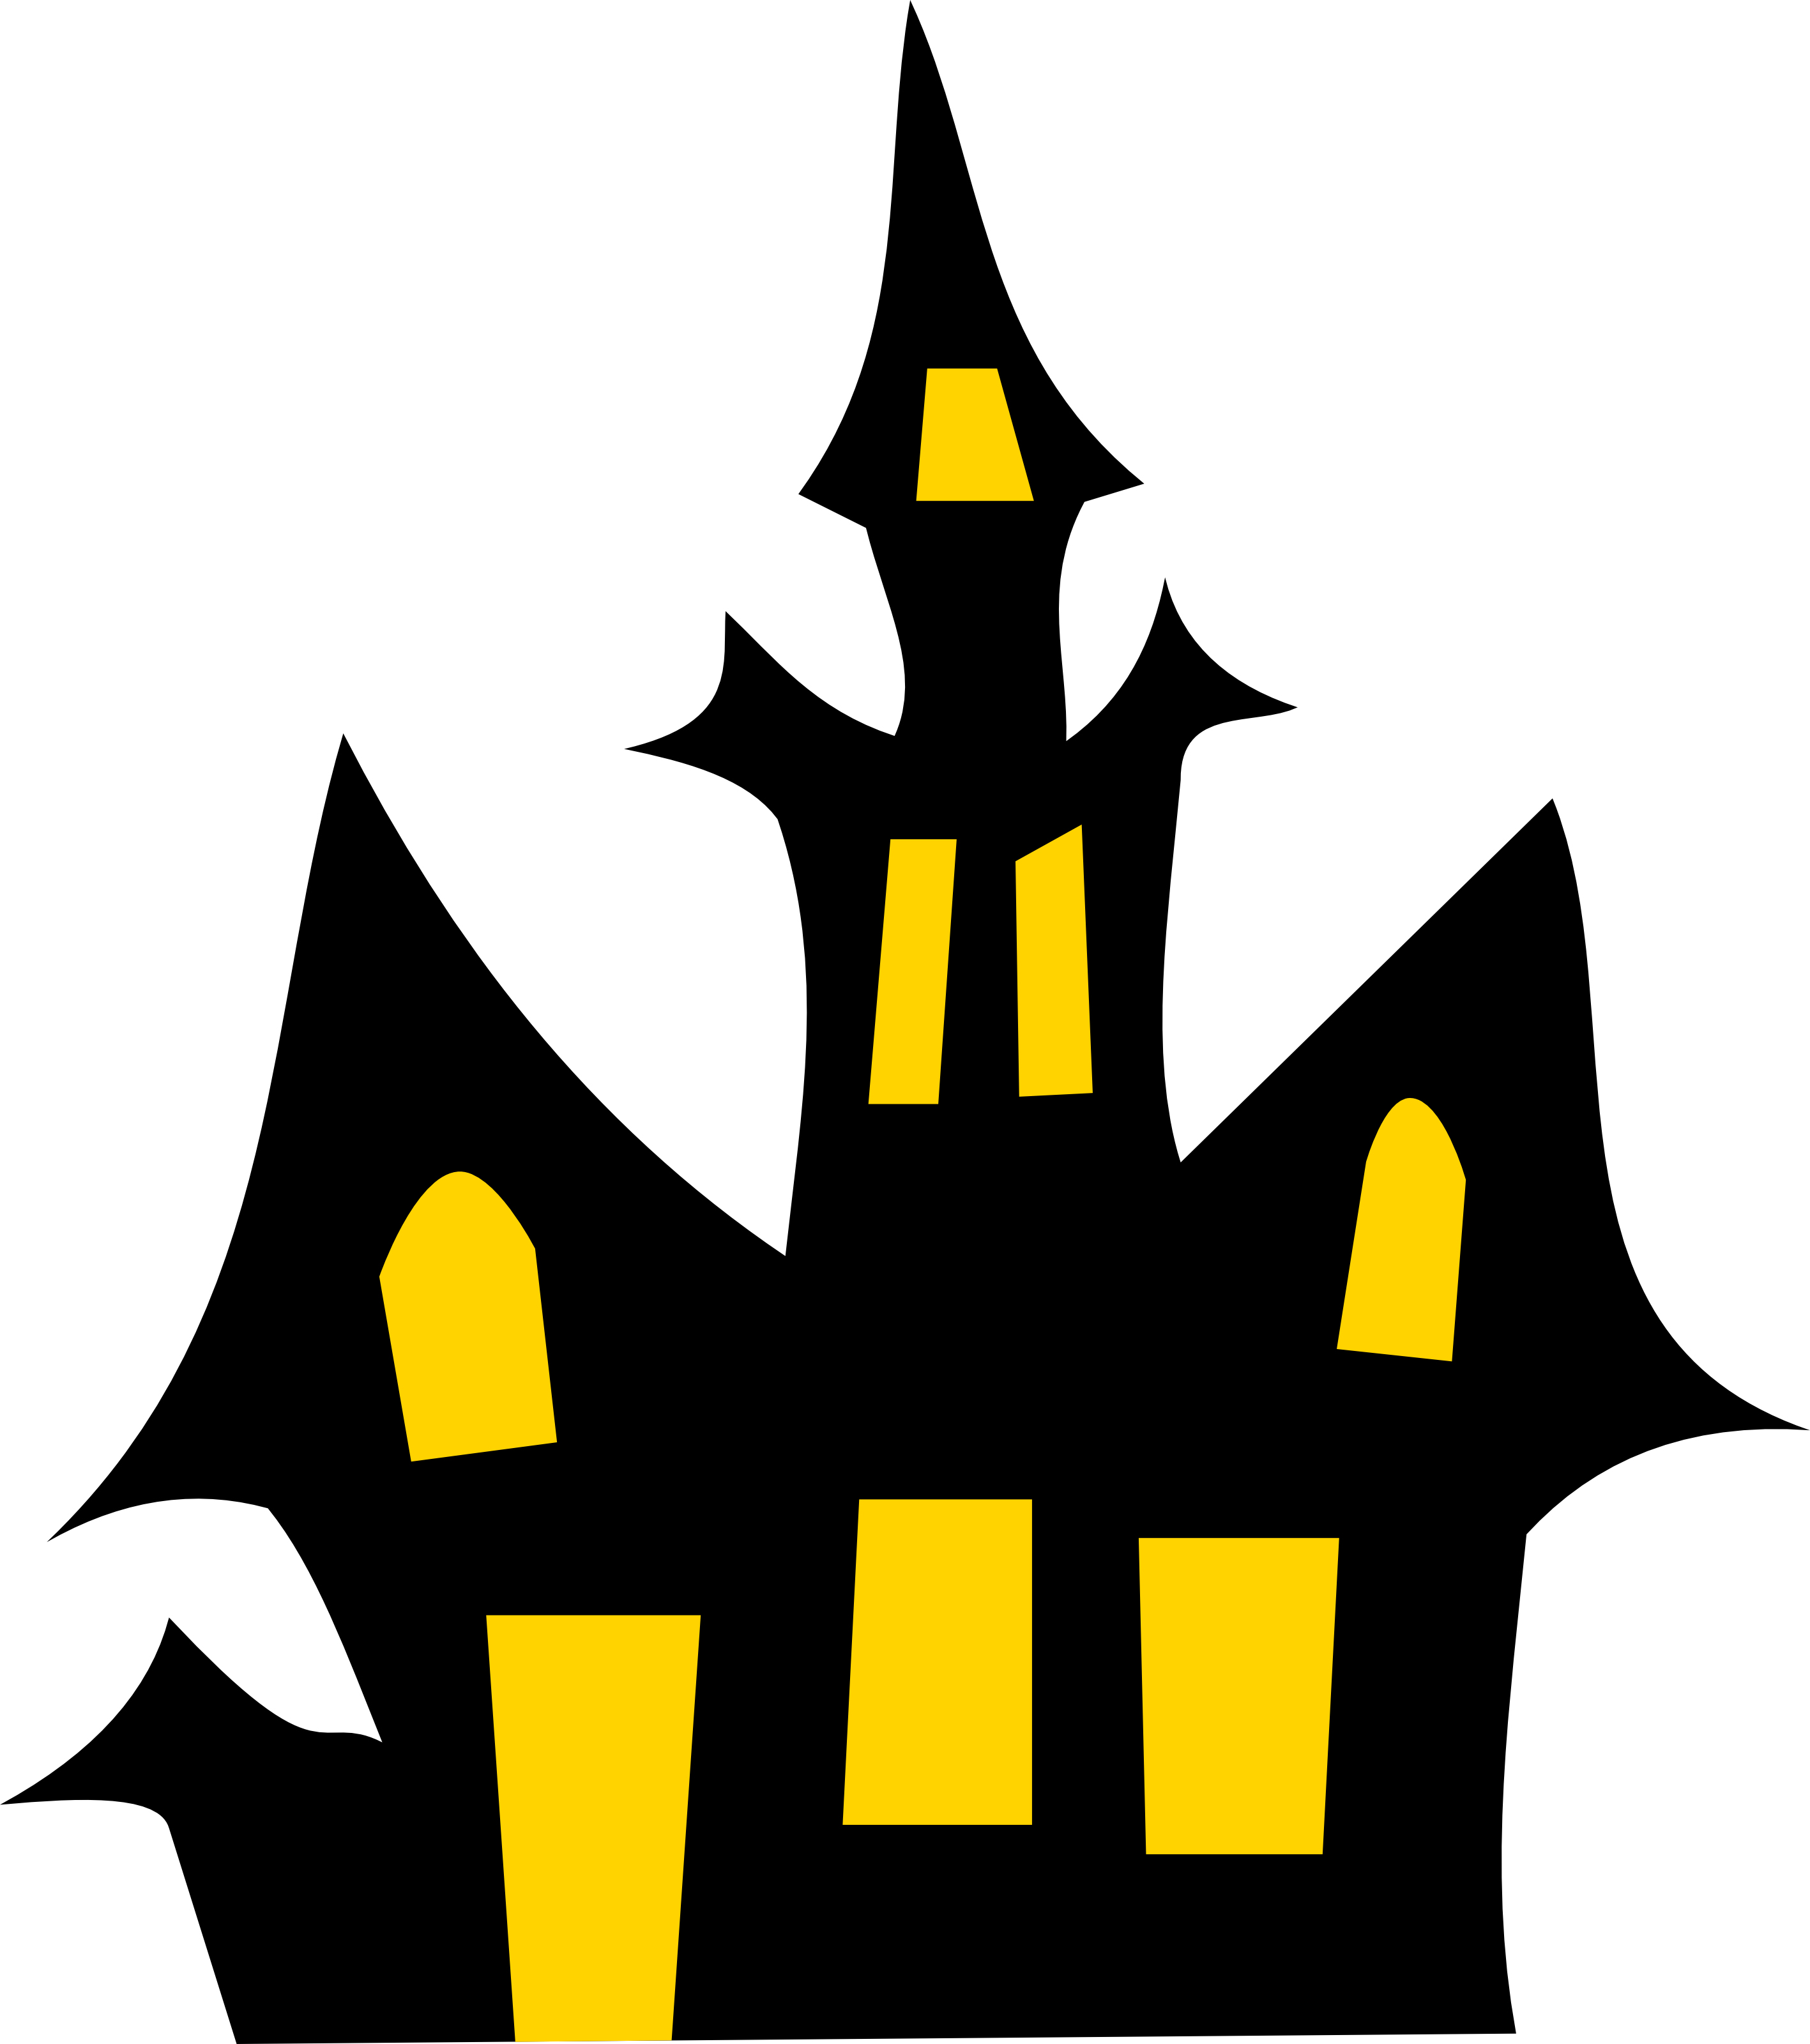 Free Haunted House Halloween Vector Clipart Illustration by 0001110 .